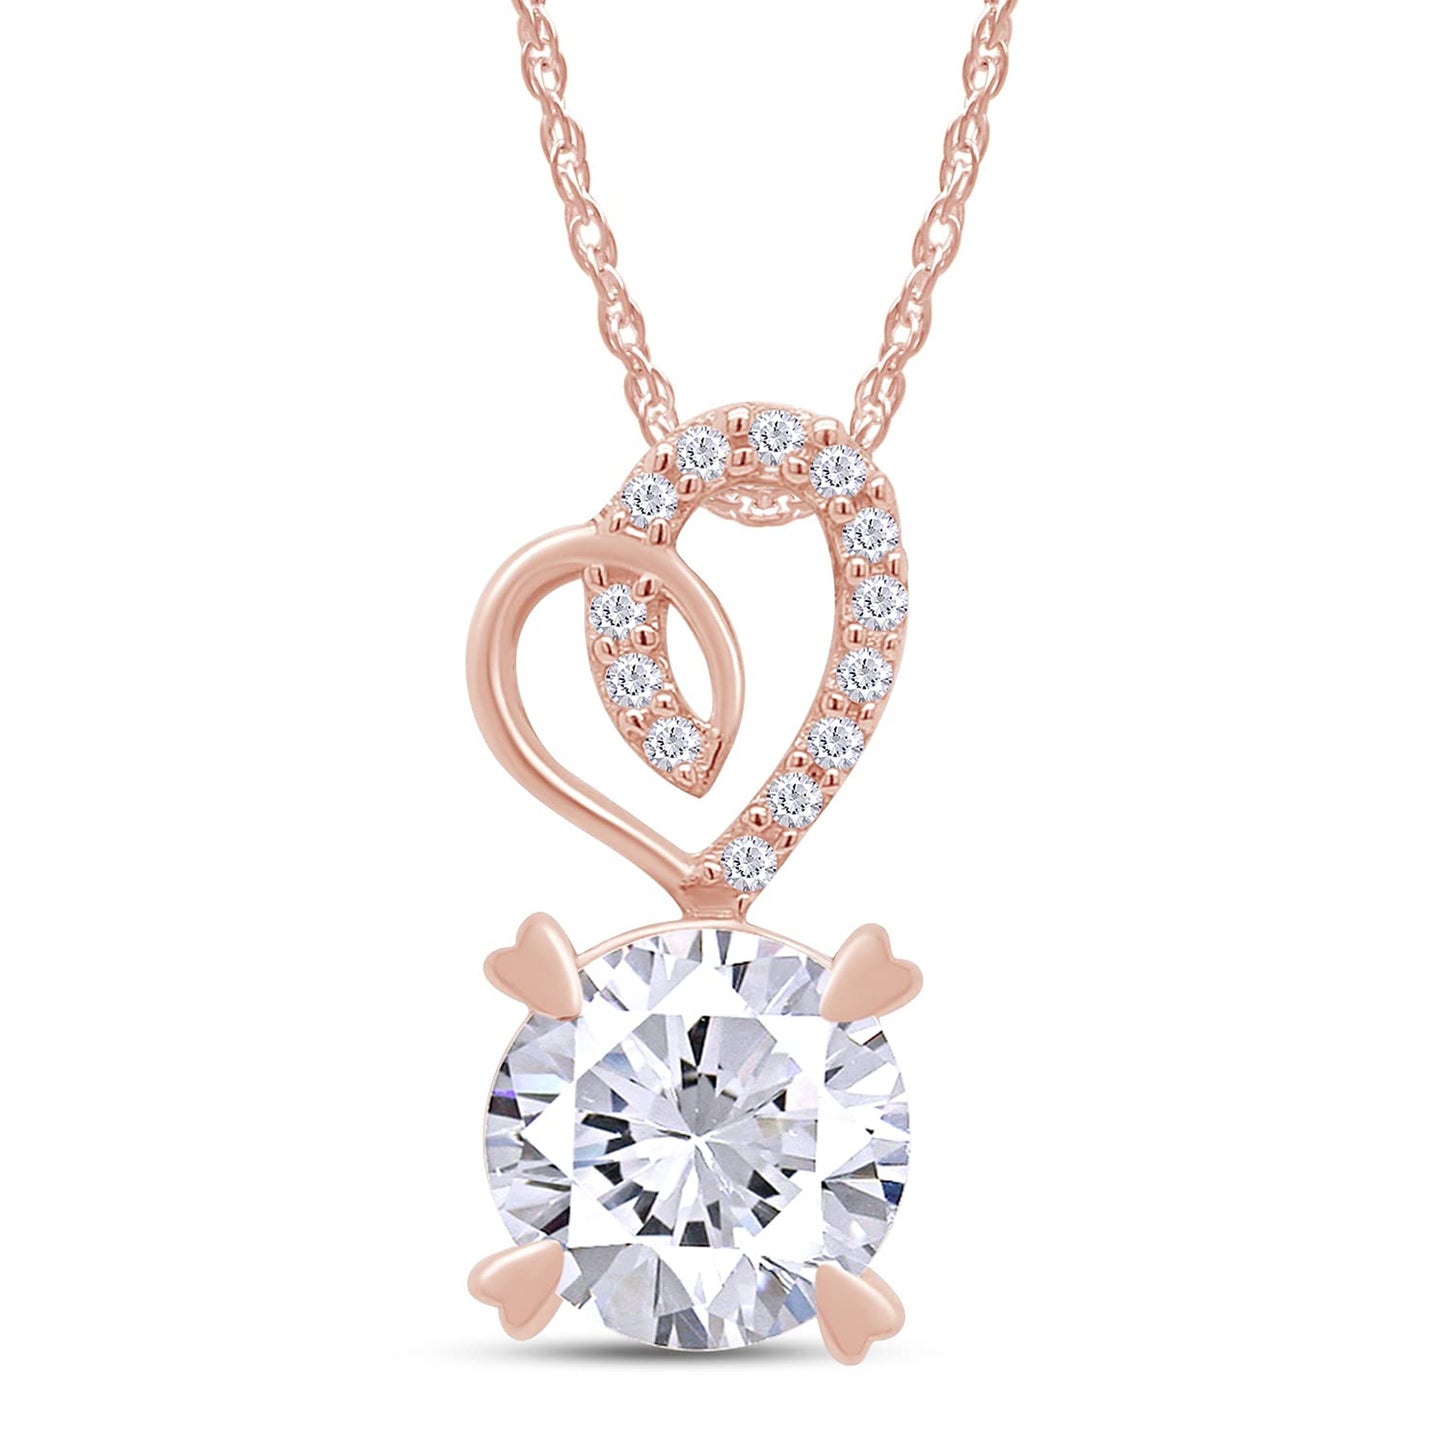 1 Carat Lab Created Moissanite Heart Pendant Necklaces In 14K Solid Gold for Women (1 Cttw)